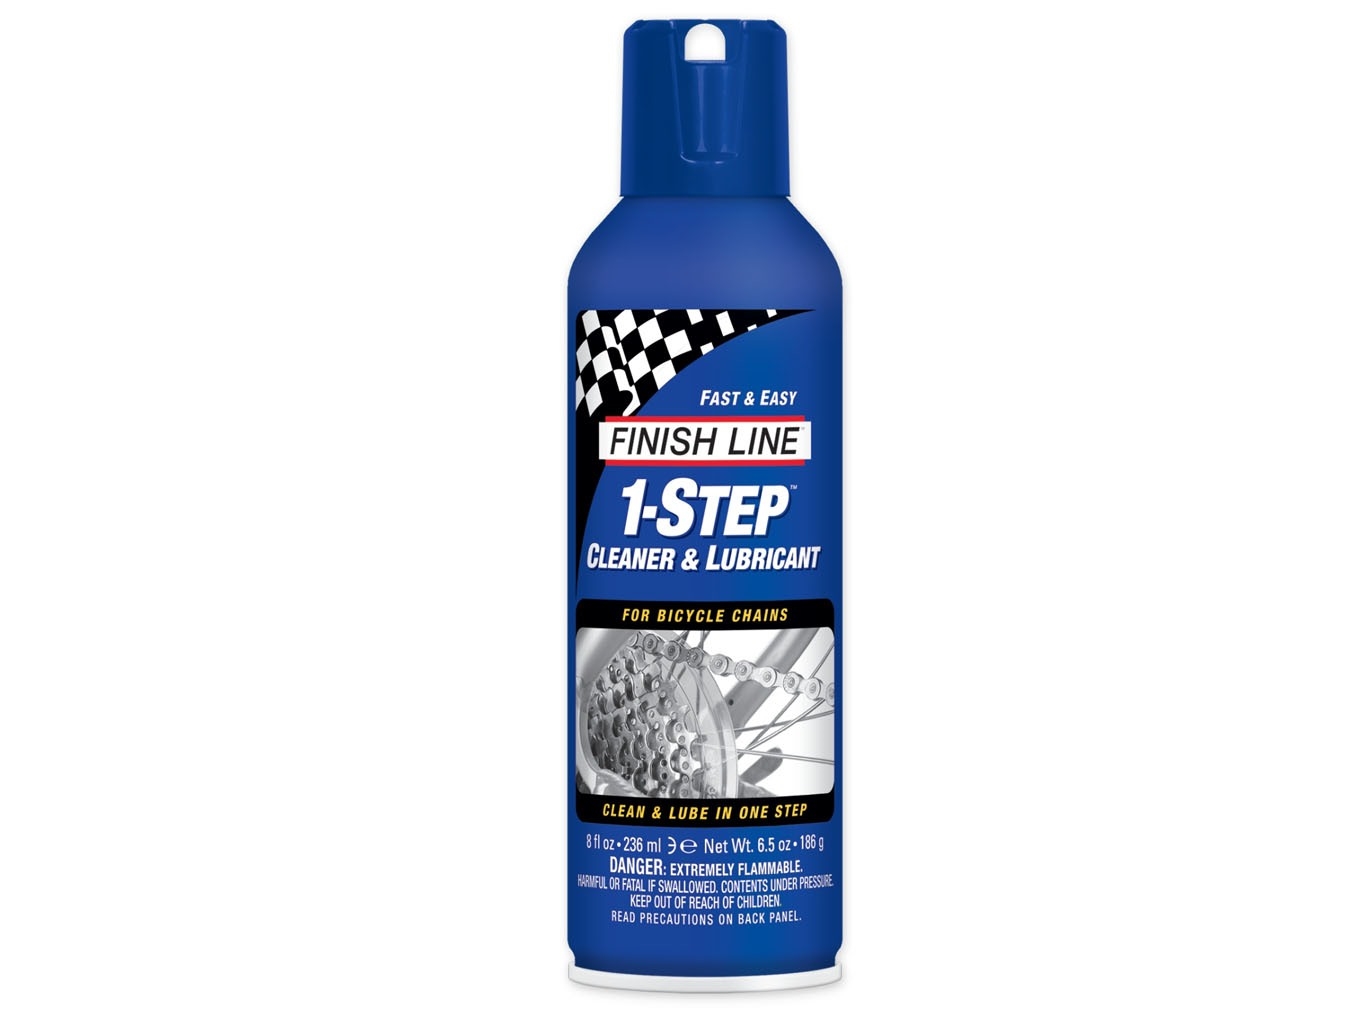 1-STEP CLEANER AND LUBRICANT (SPRAY)